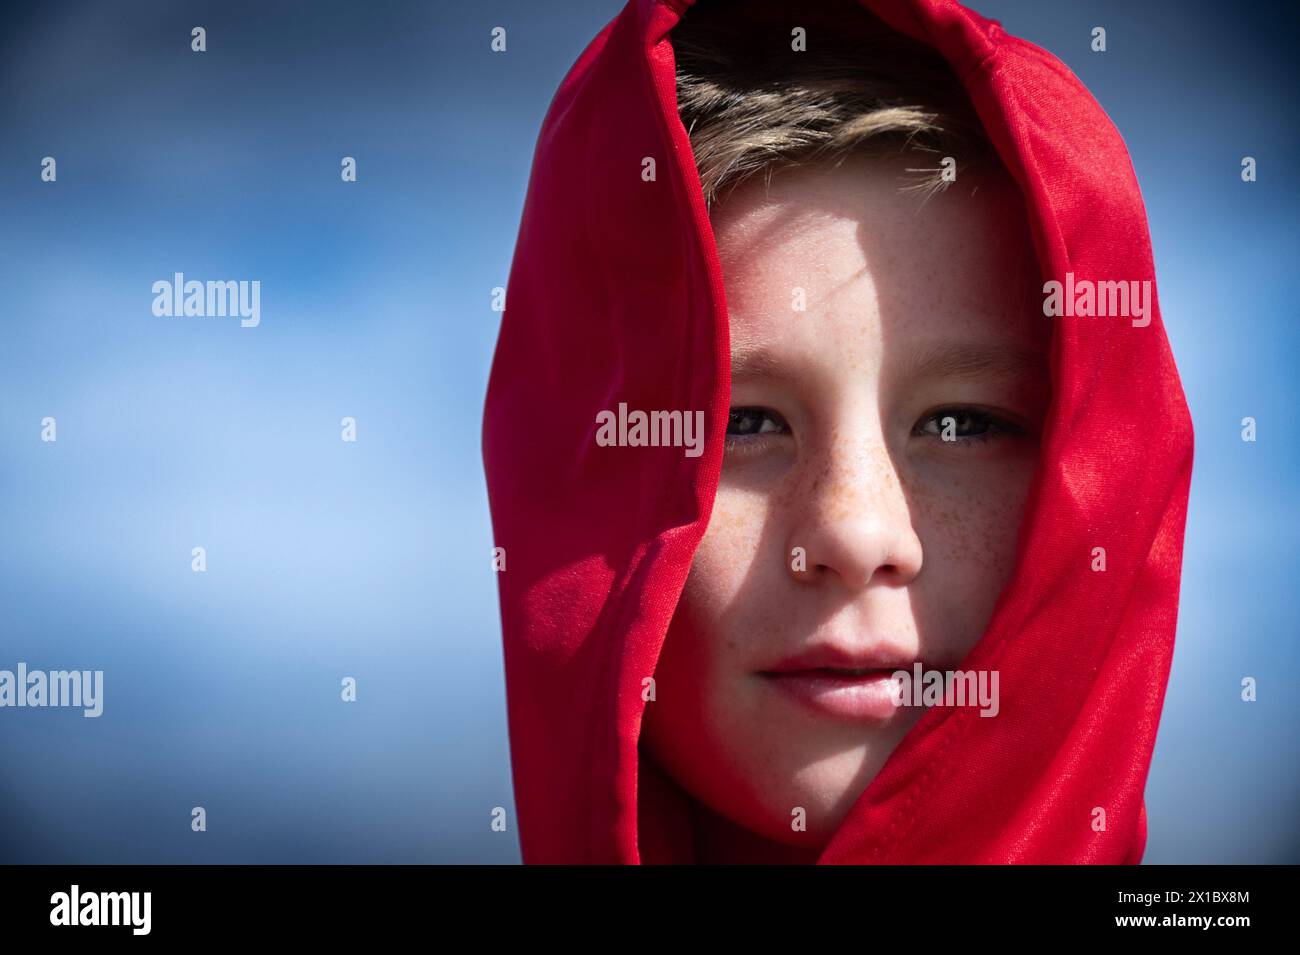 A young boy with light skin and freckles is partially draped in a bright red hoodie that covers his head, leaving his face visible. the background is Stock Photo